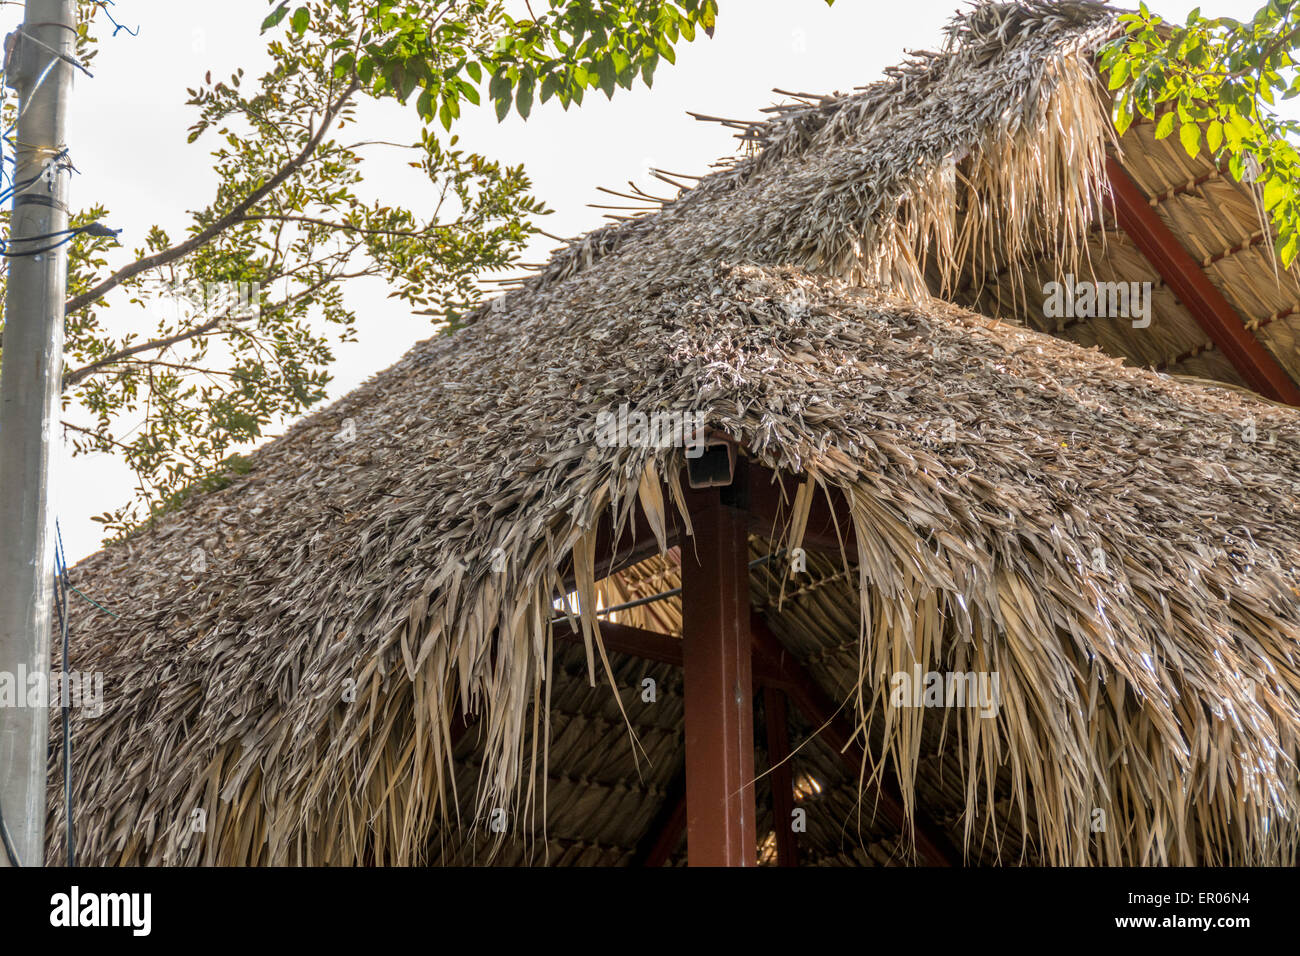 Roof of thatched hut in Guatemala Stock Photo